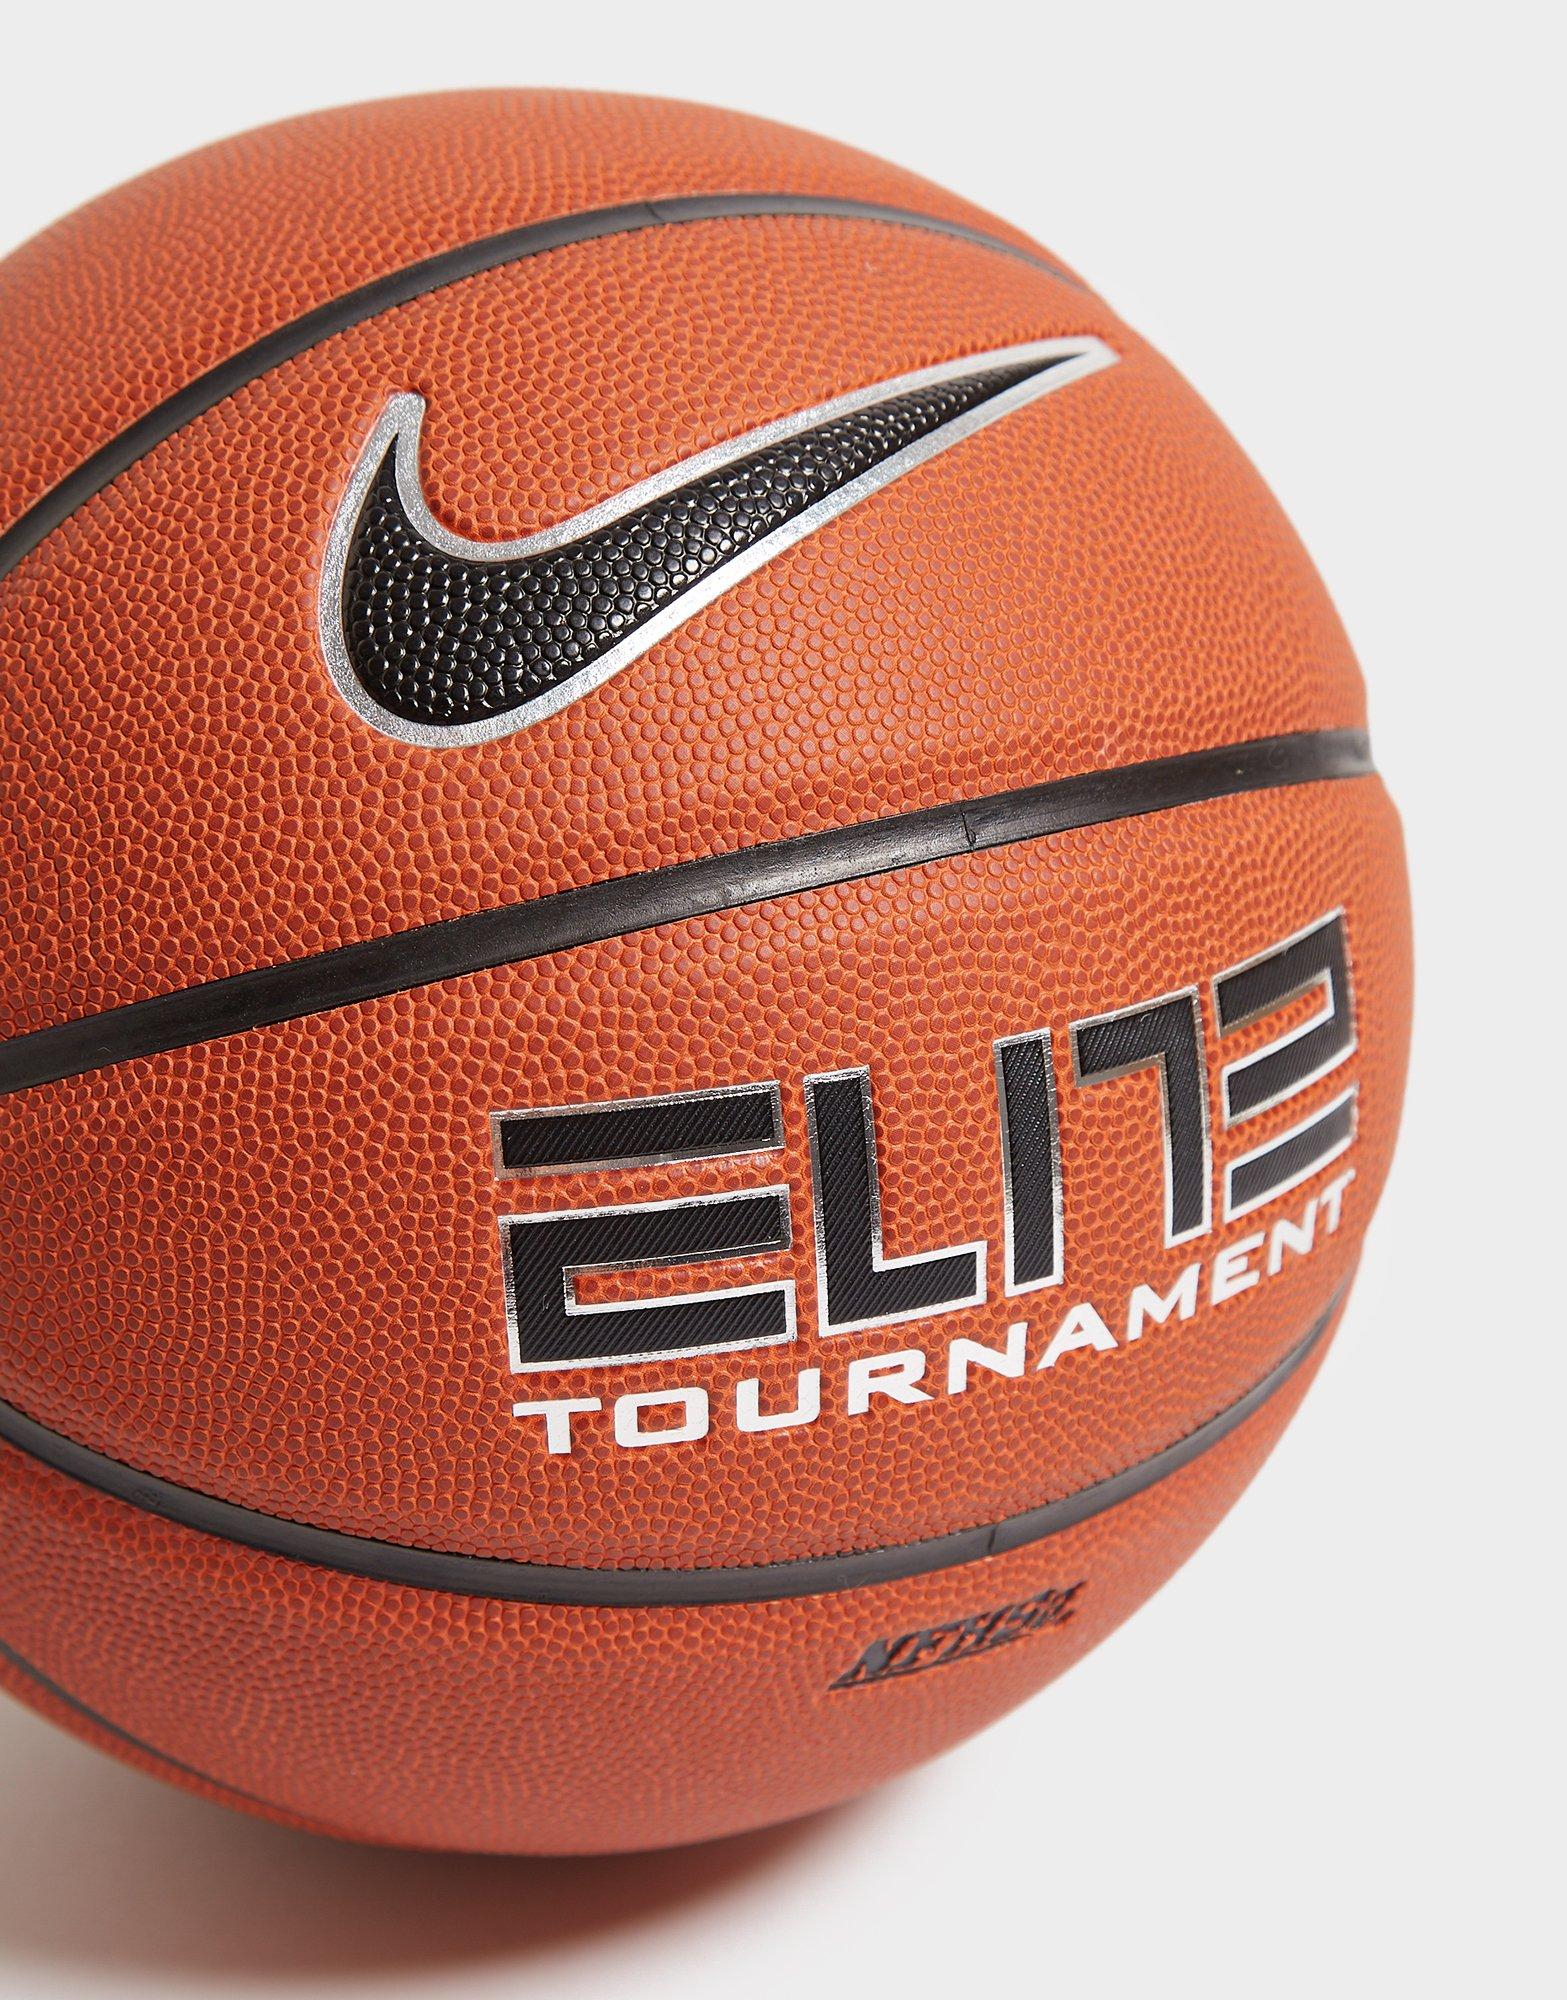 nike elite competition basketball review